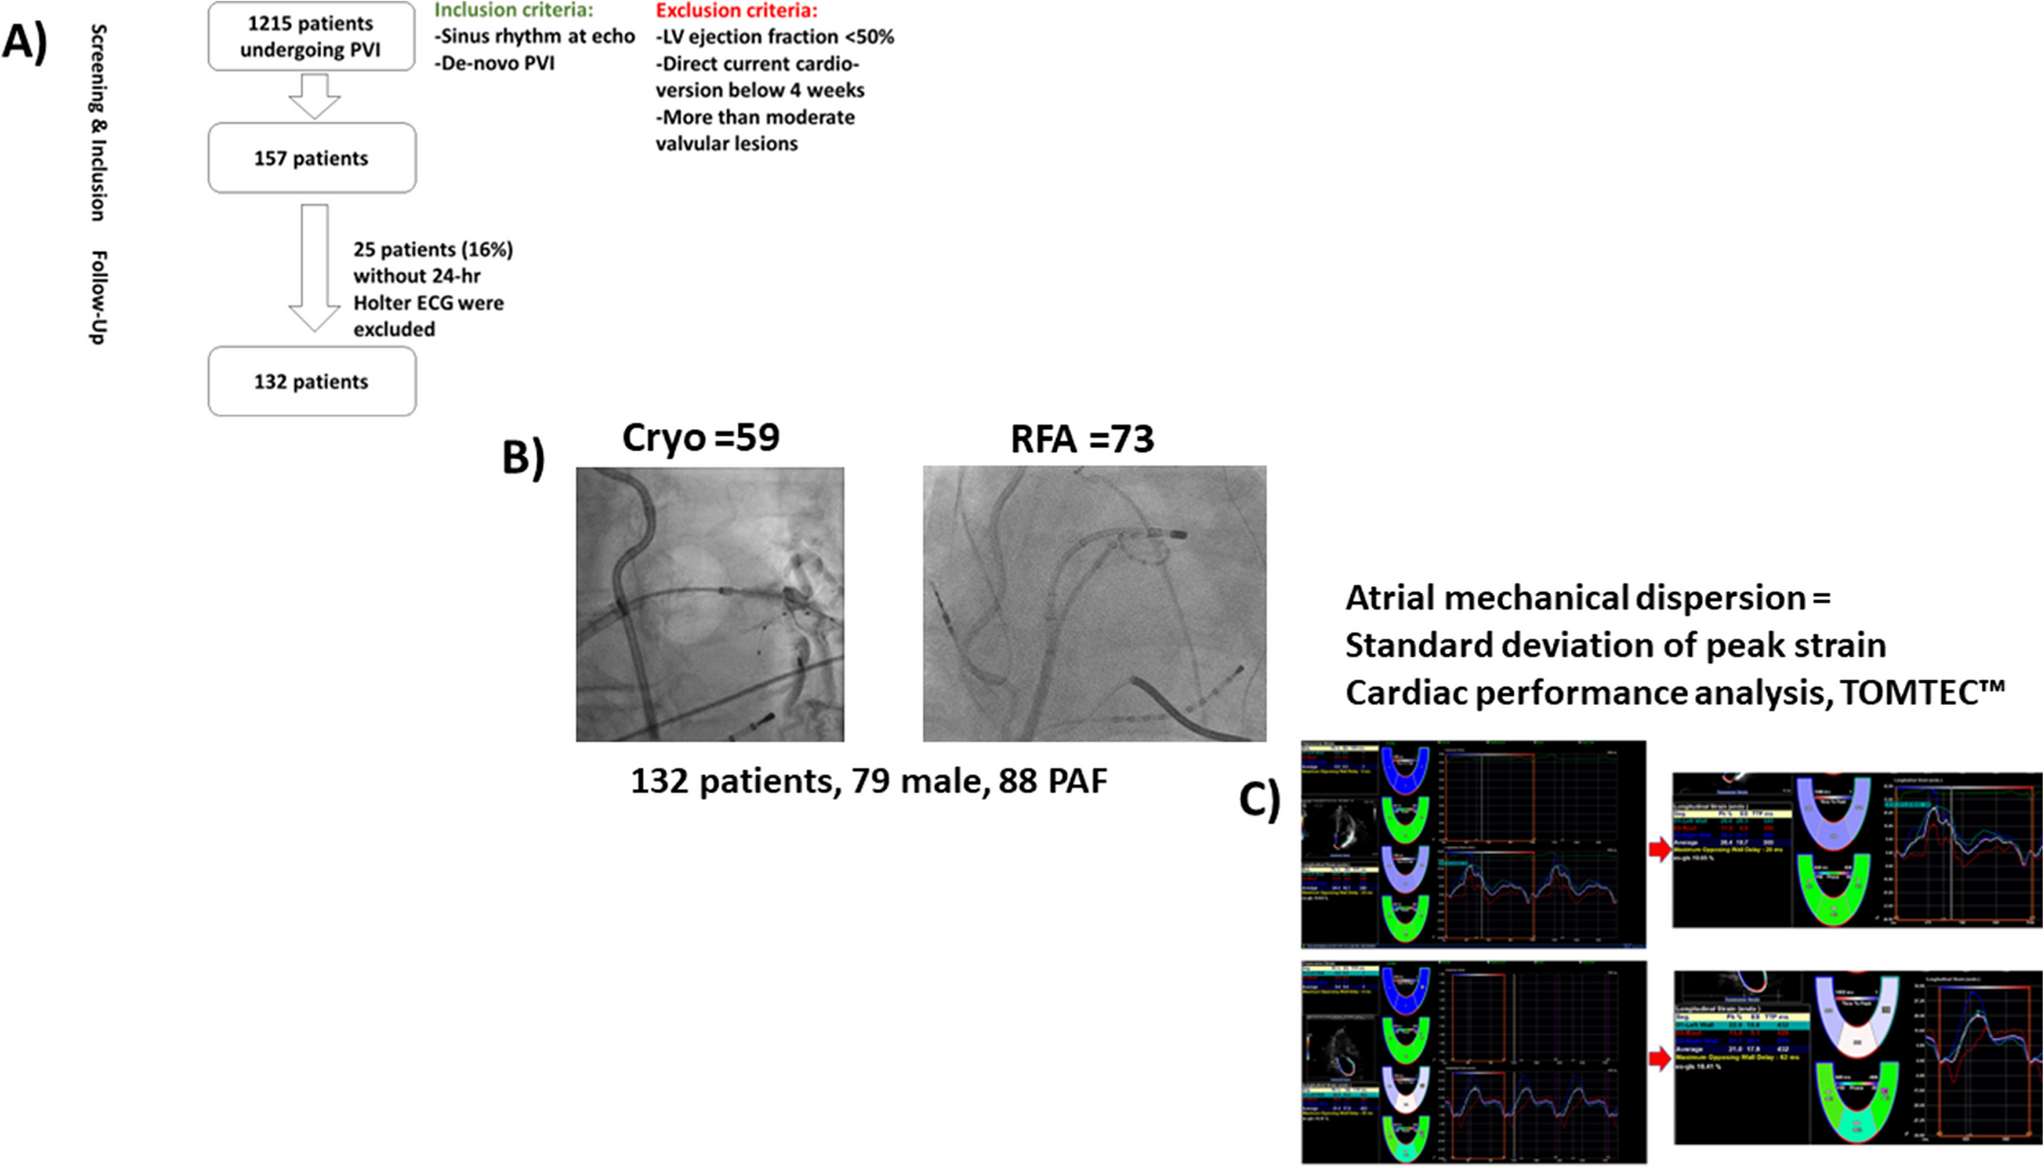 Association of atrial mechanical dispersion with atrial fibrillation recurrence following catheter ablation: results of the ASTRA-AF pilot study